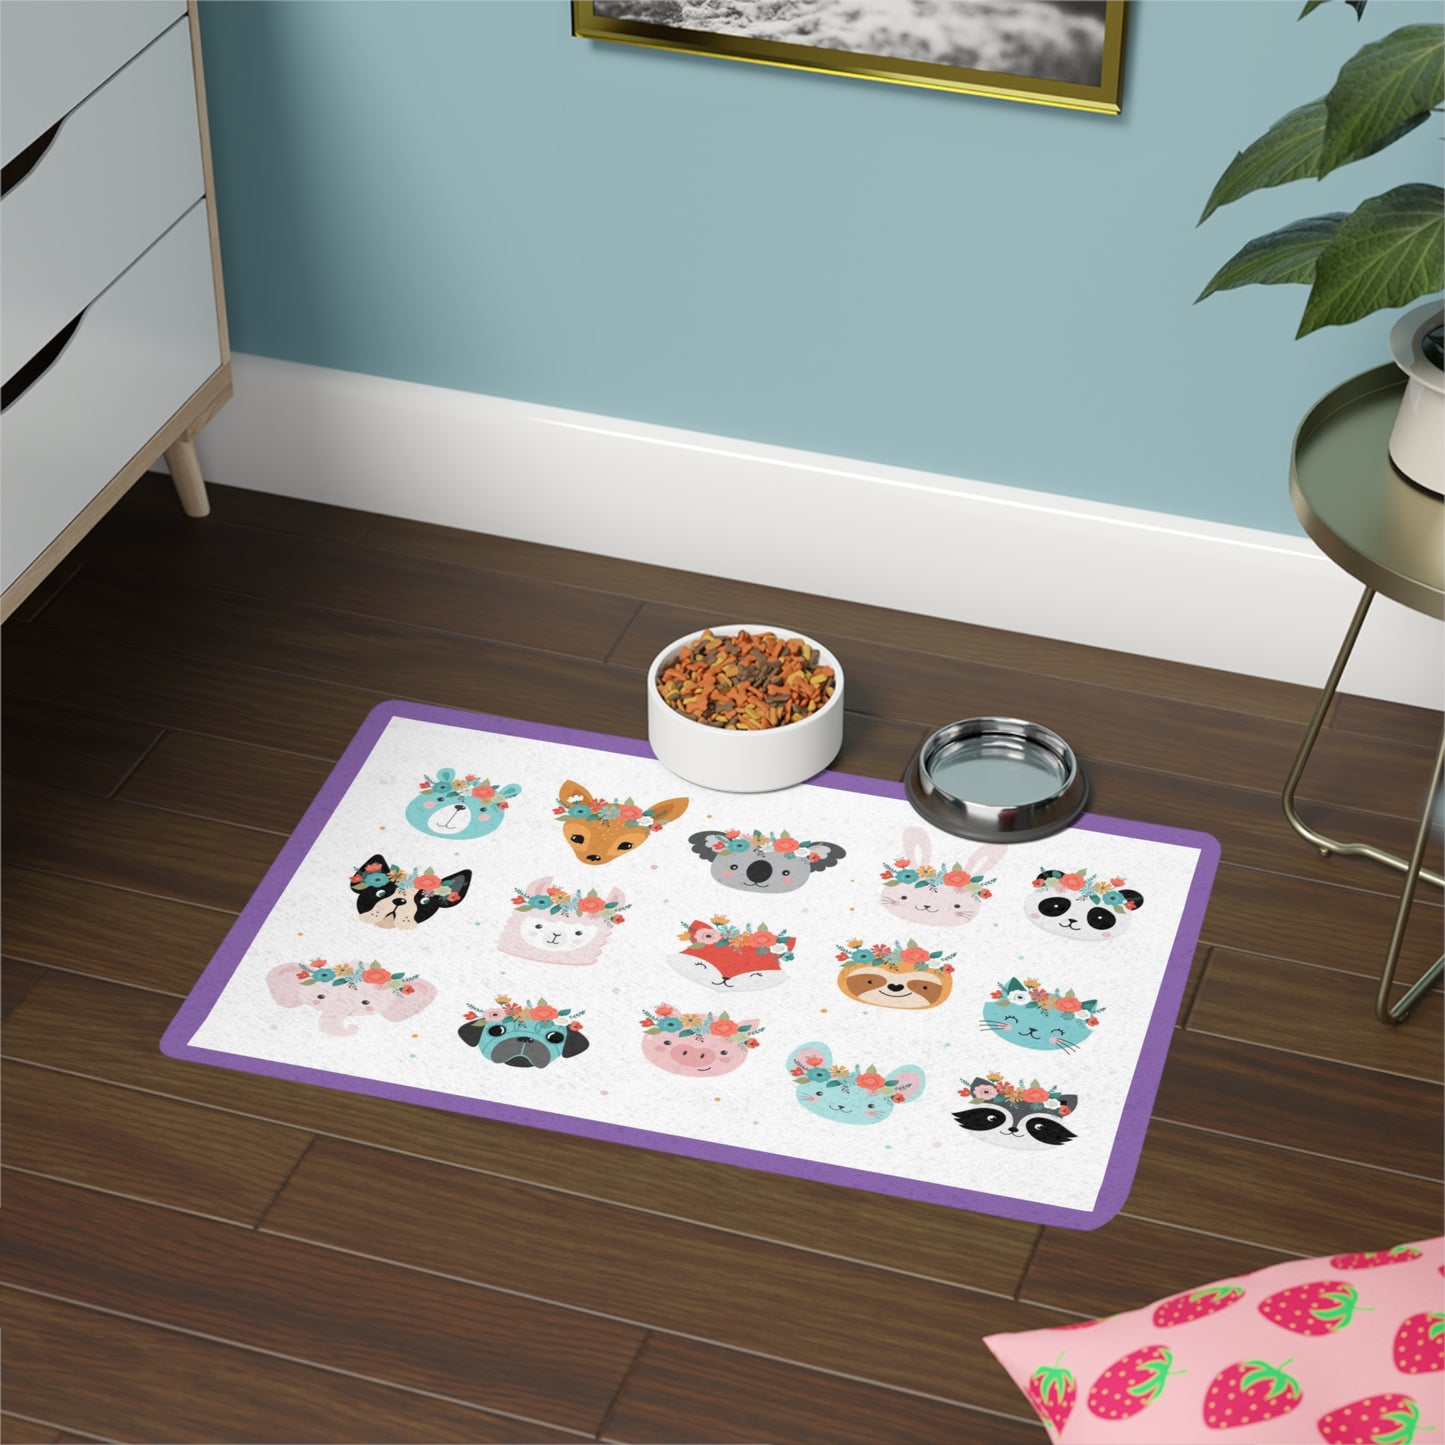 Pet Food Mat (12x18) Adorable Dogs and Animals with Flowers In Their Hair